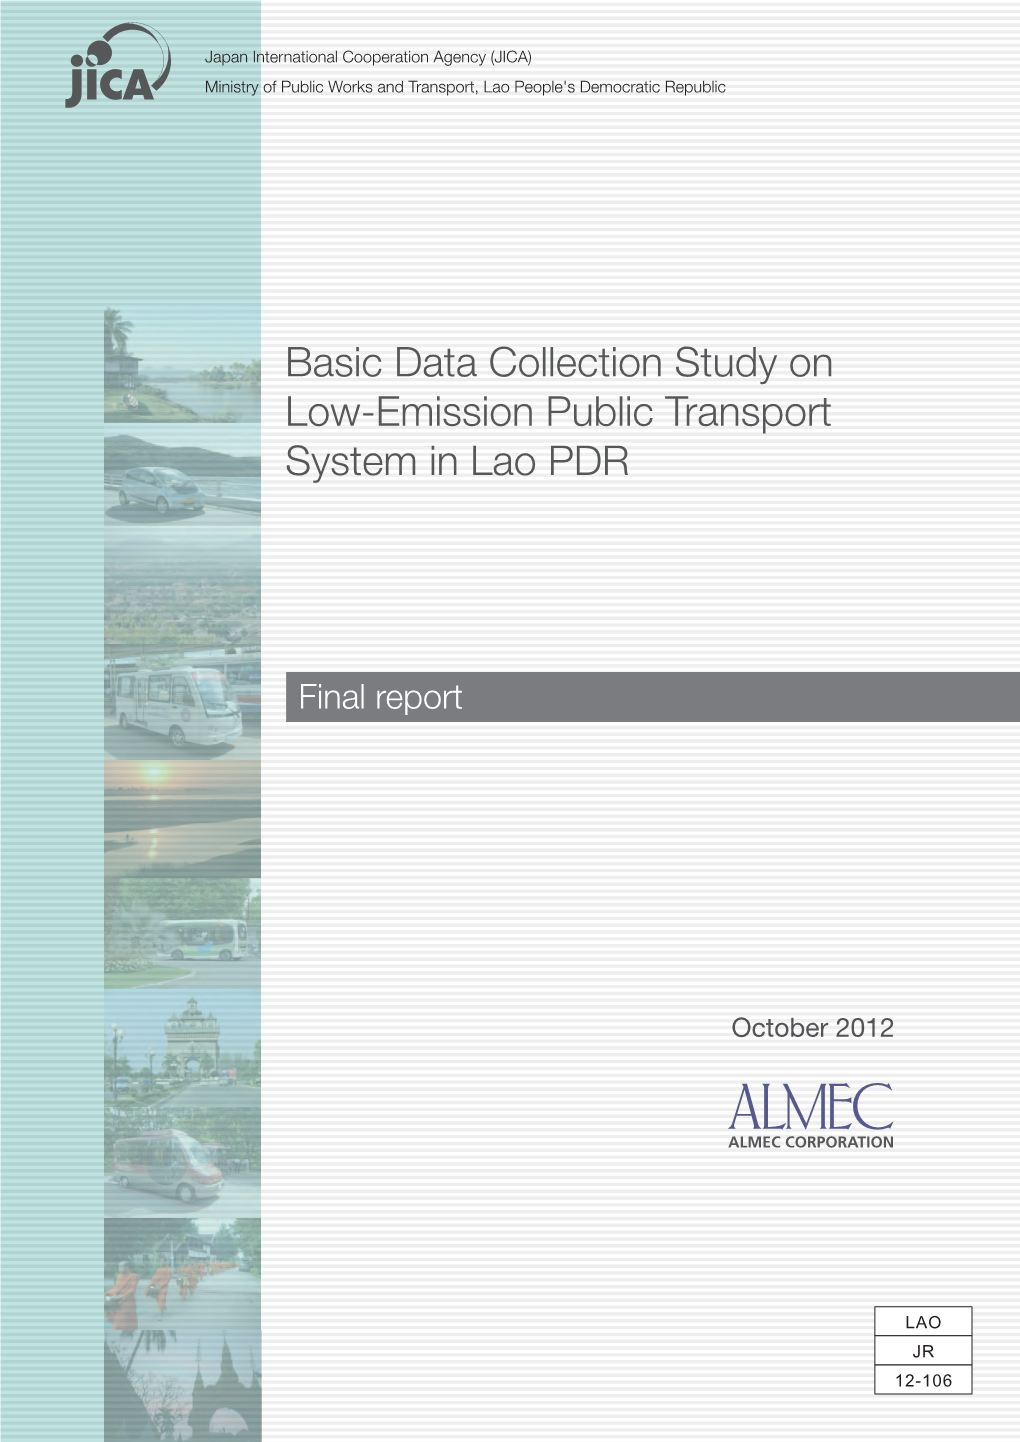 Basic Data Collection Study on Low-Emission Public Transport System in Lao PDR